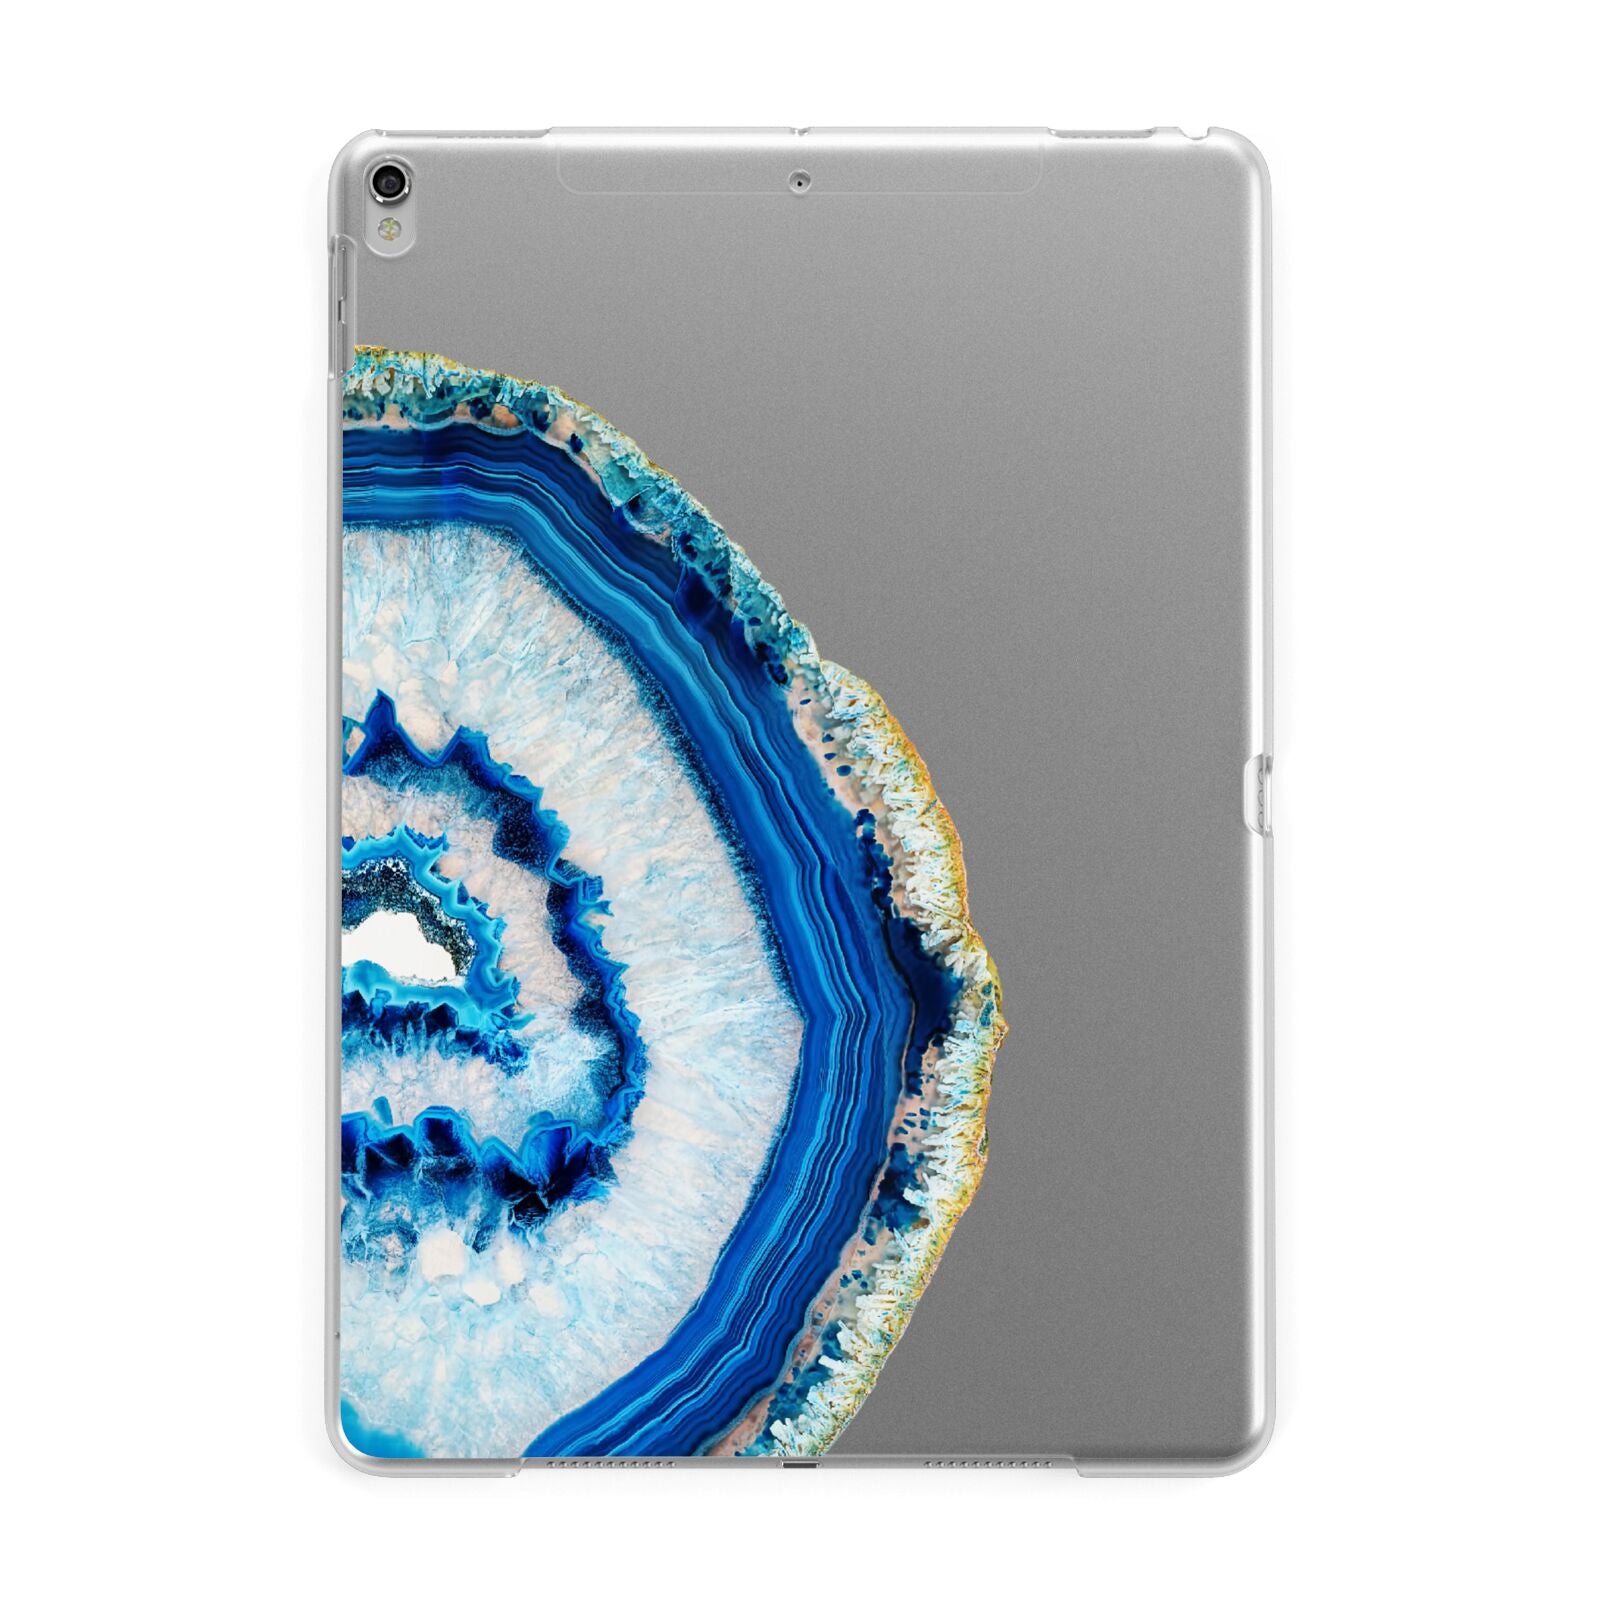 Agate Dark Blue and Turquoise Apple iPad Silver Case